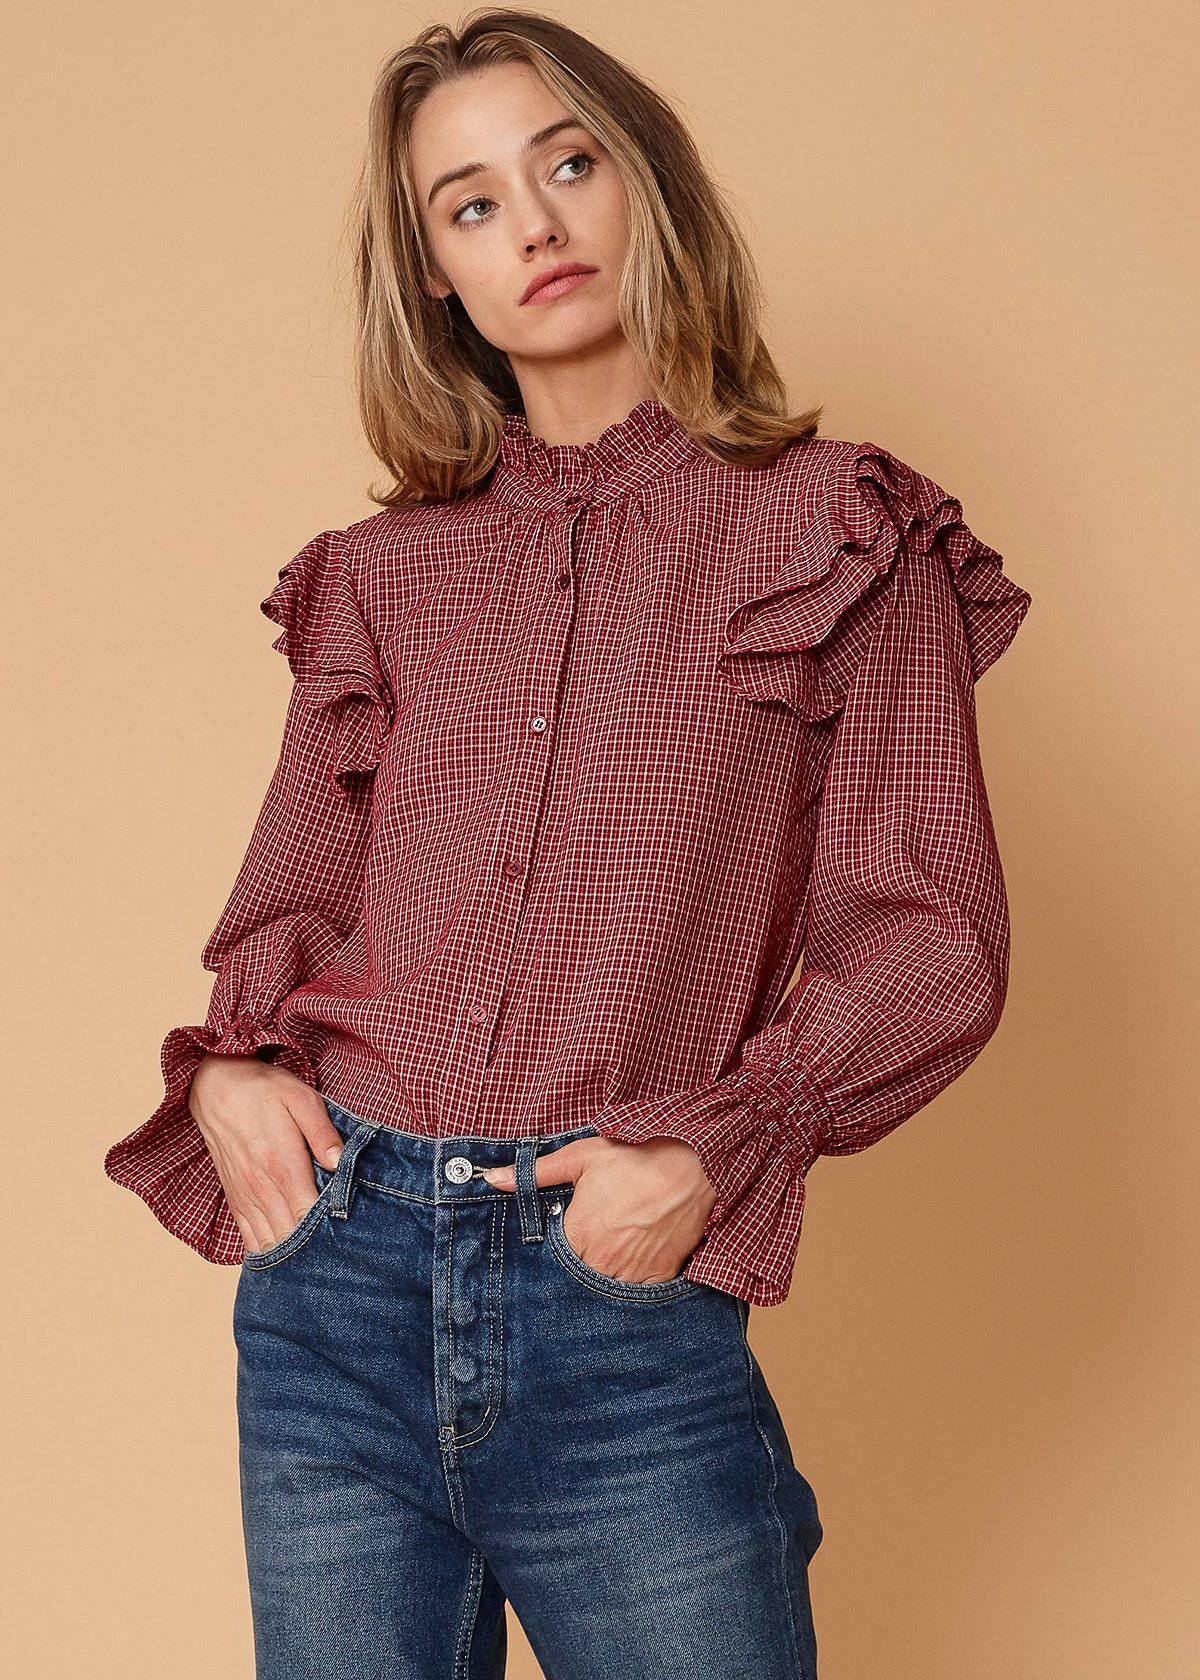 Women's Ruffle Detailed Plaid Shirt in Red by Shop at Konus